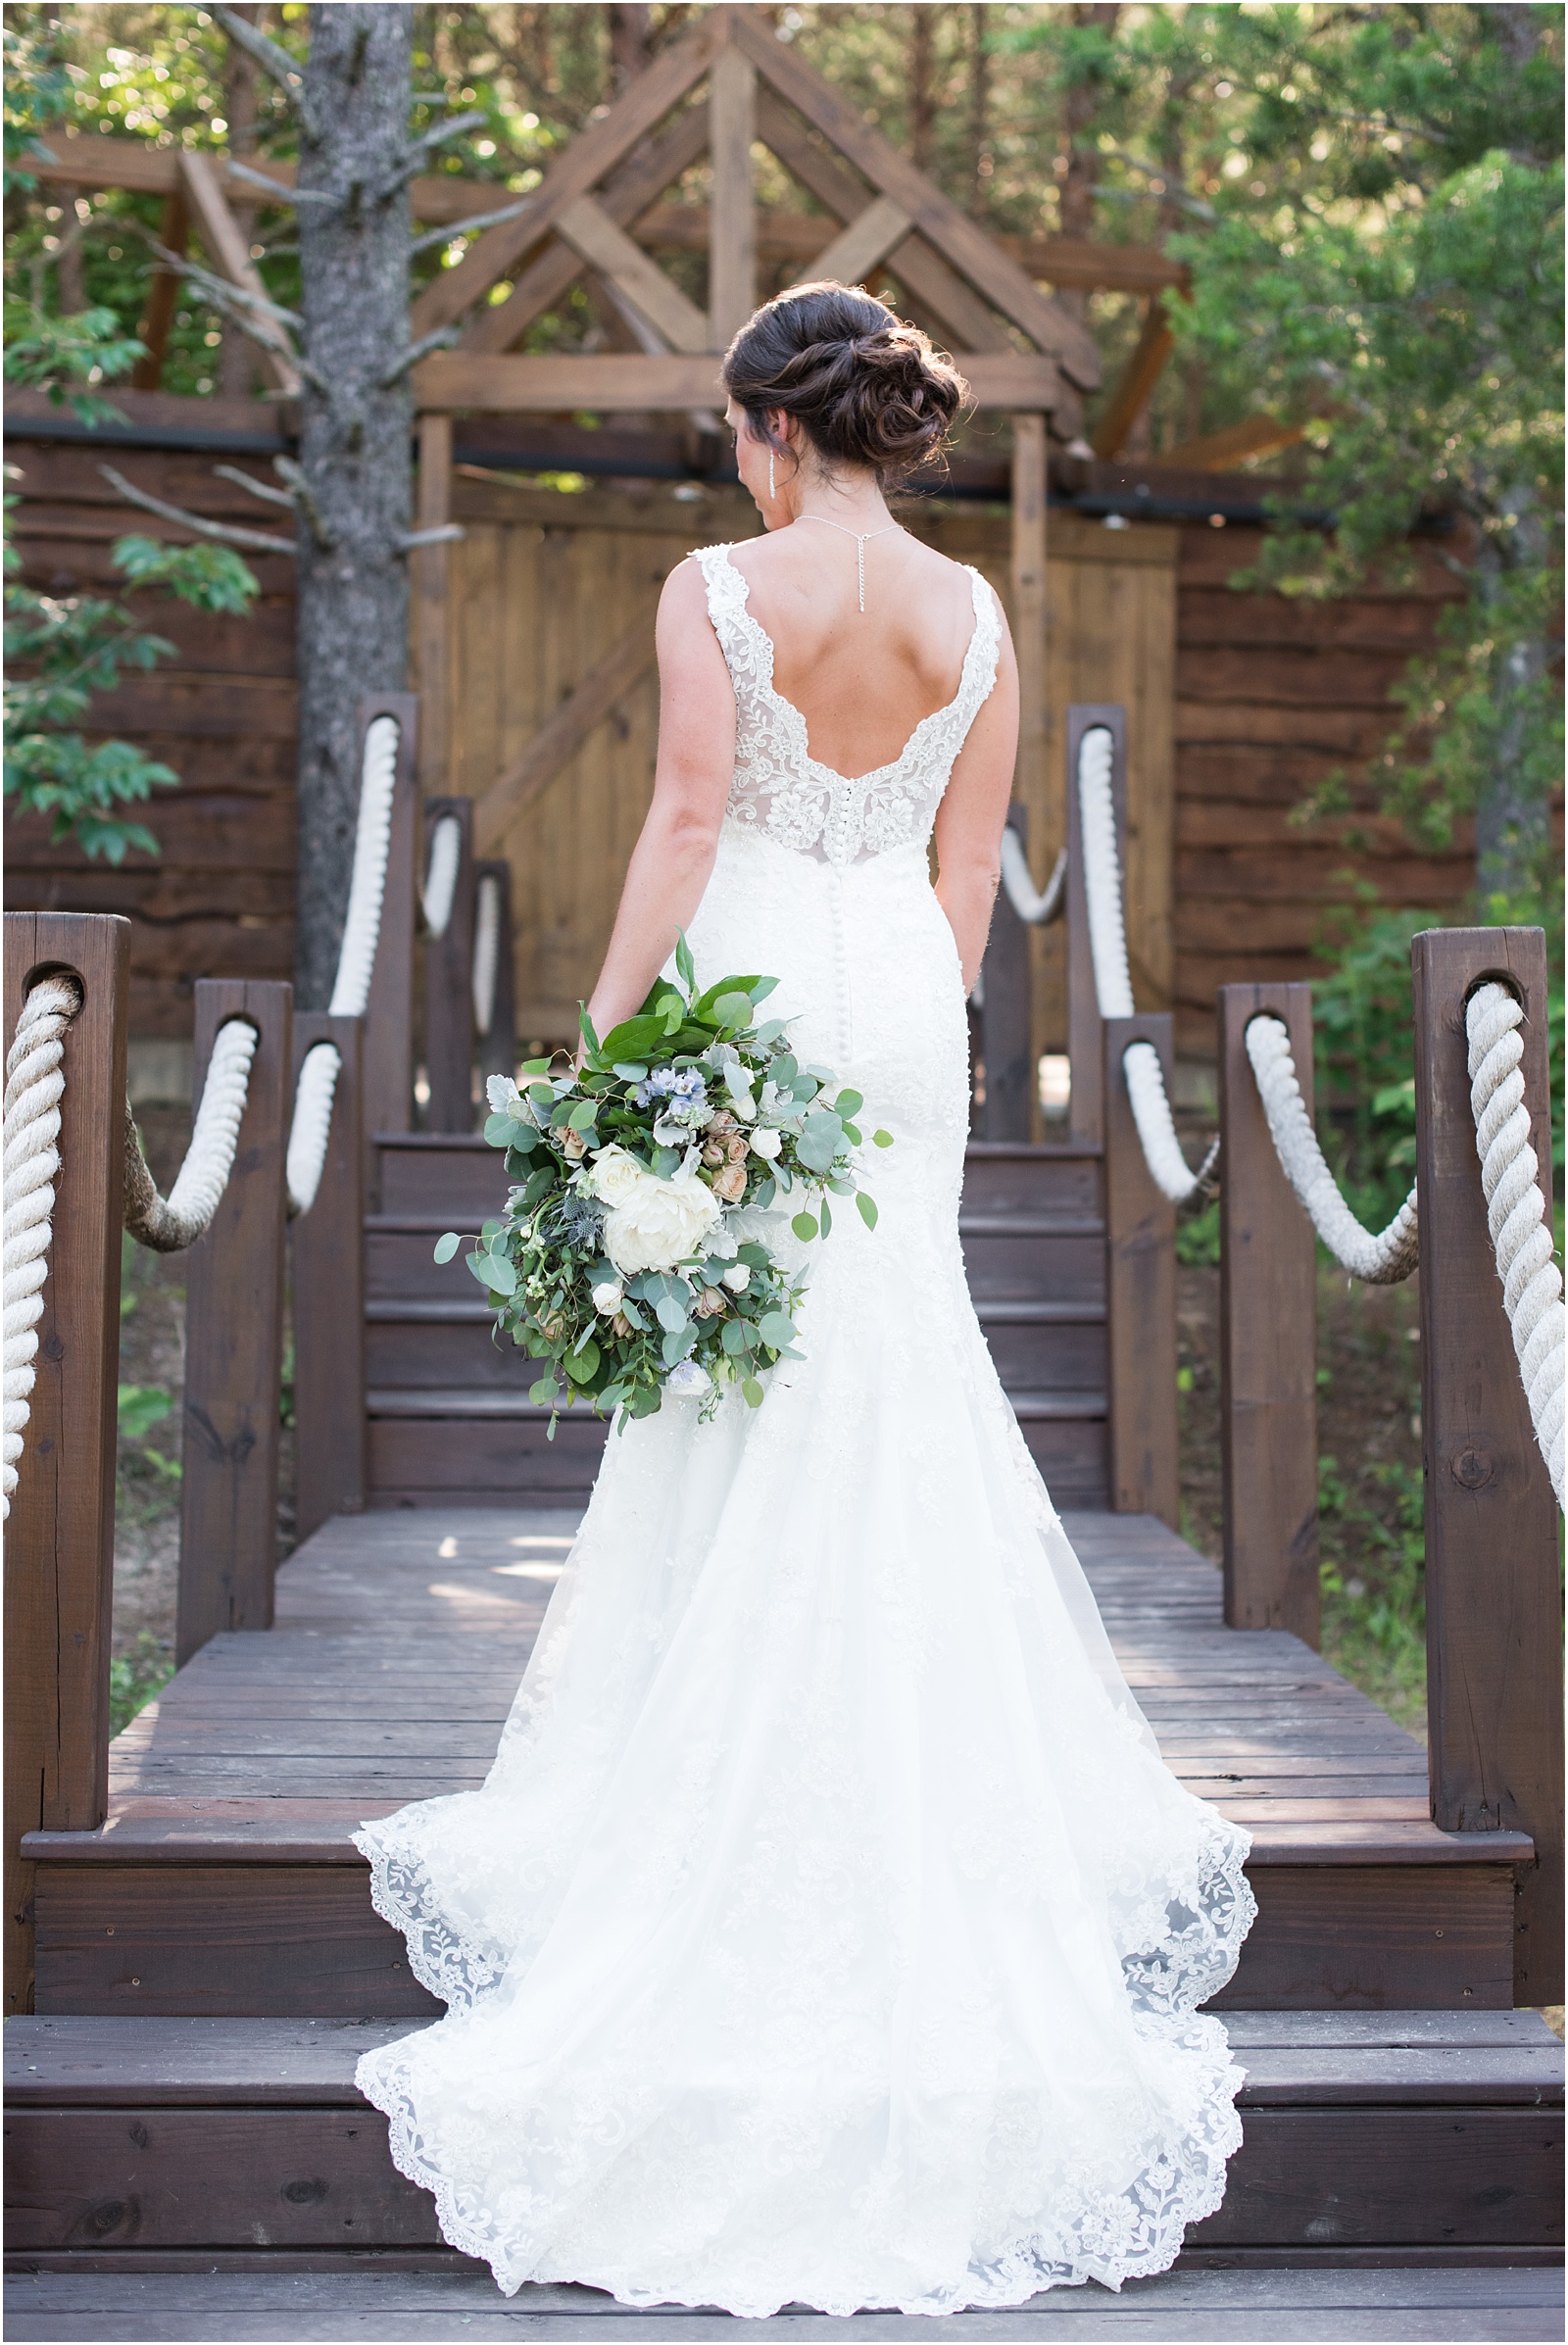 the back of the brides dress holding lush green bridal bouquet on stairs at The Meadows At Walnut Cove